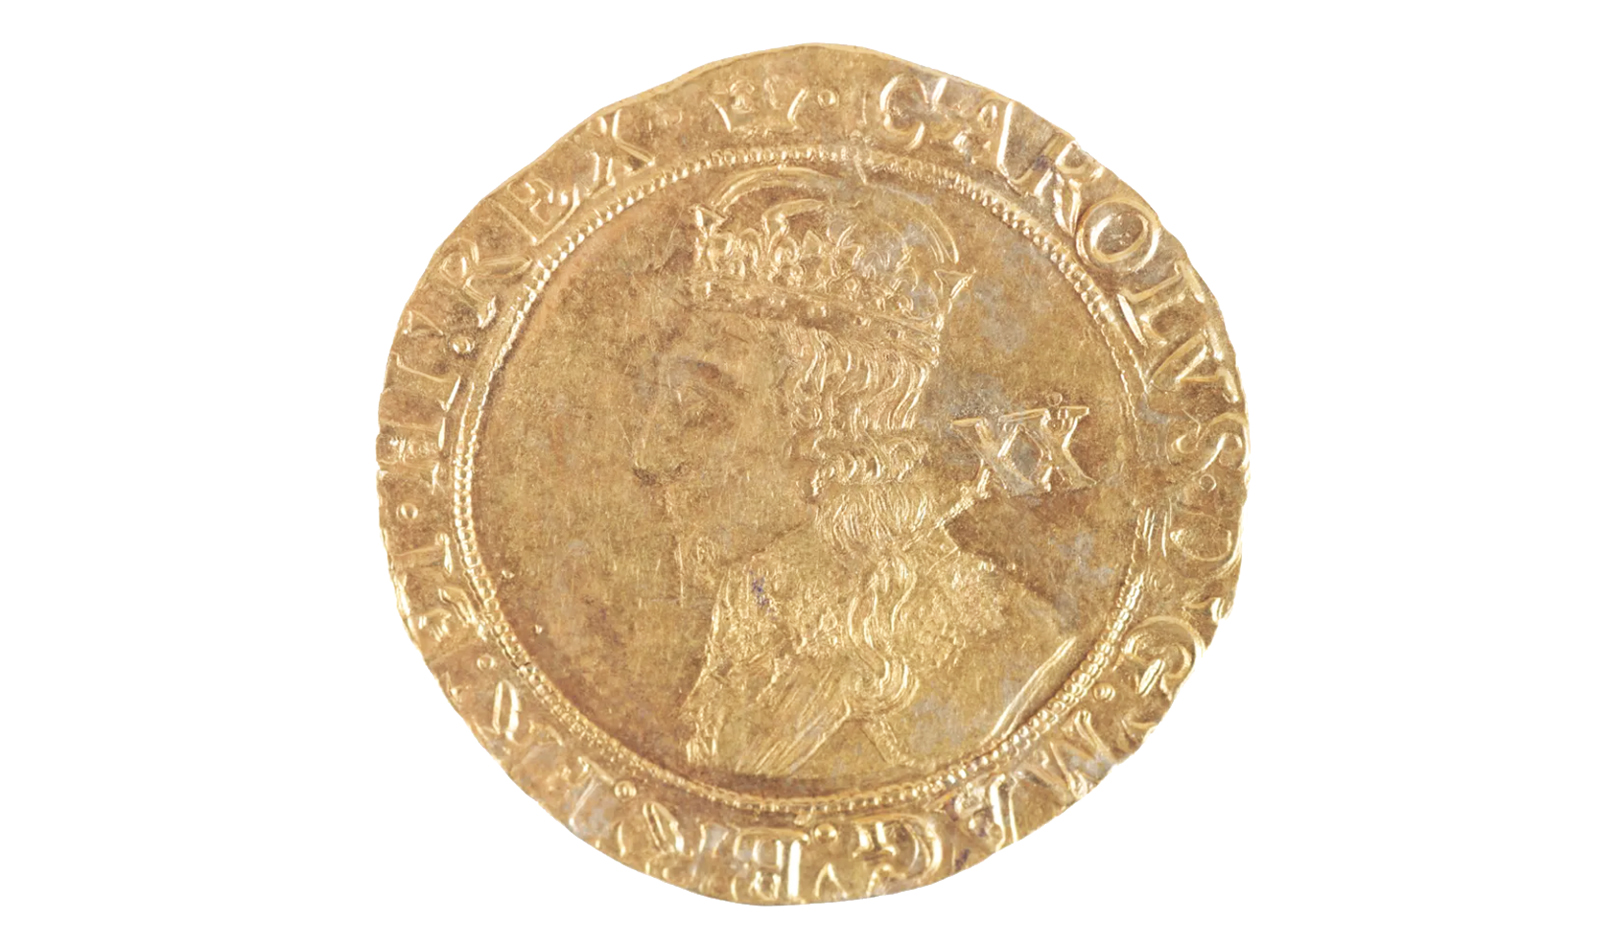 A Charles I gold unite crown was sold for £5,000. Picture: Duke's